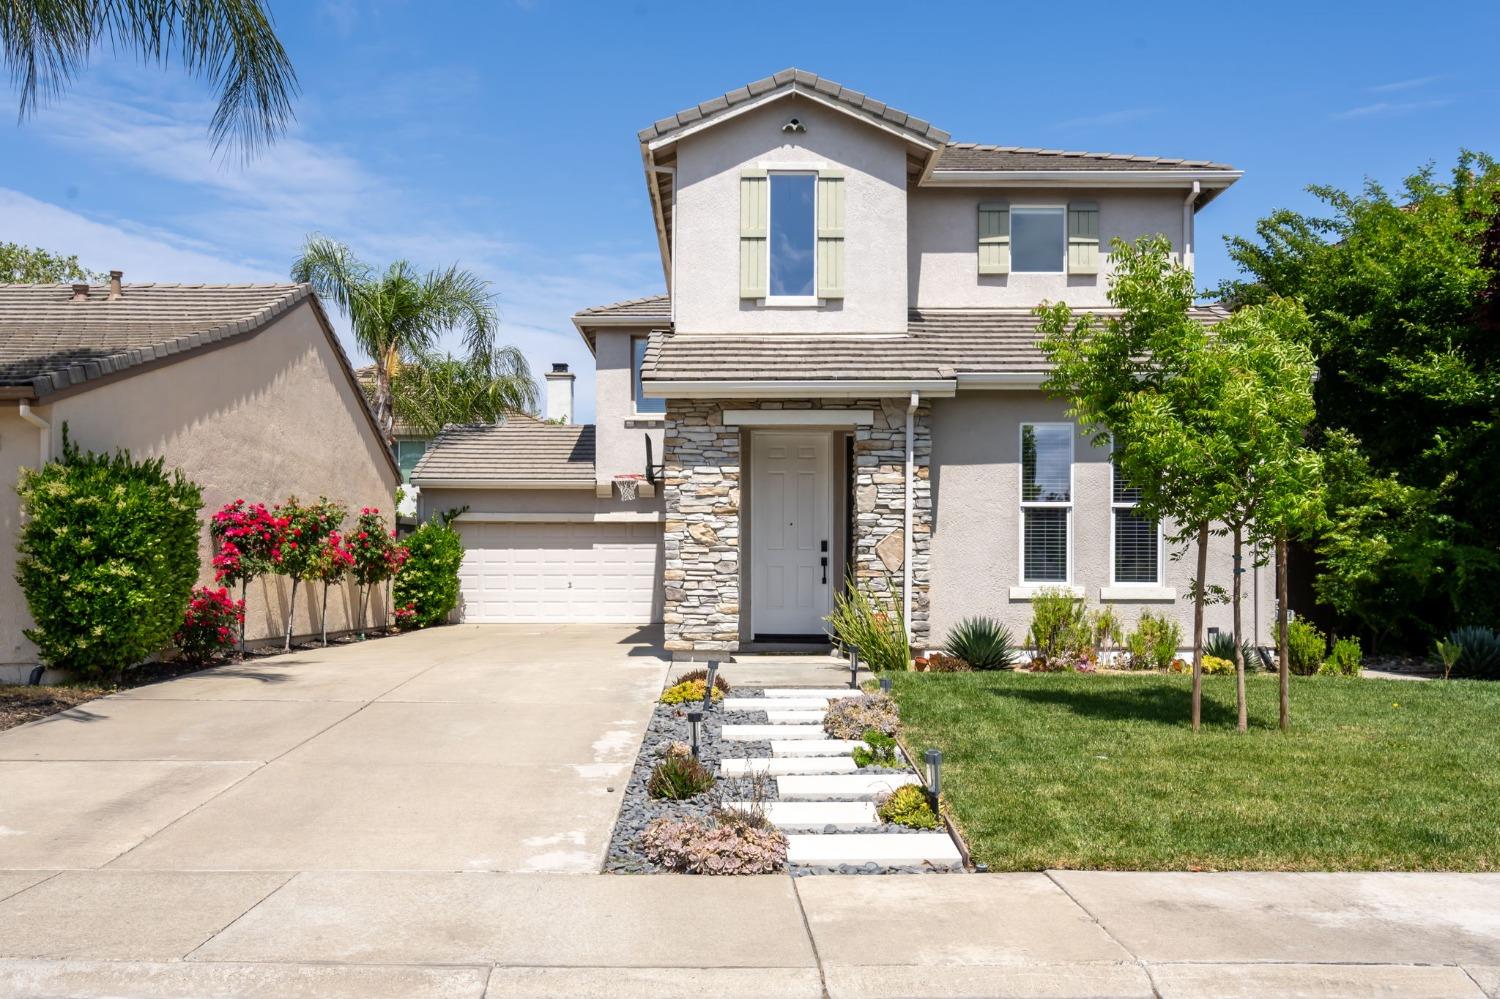 This Natomas Park beauty is everything you've been waiting for! 4 bed, 3 bath, 2209 sq feet, w/ an e